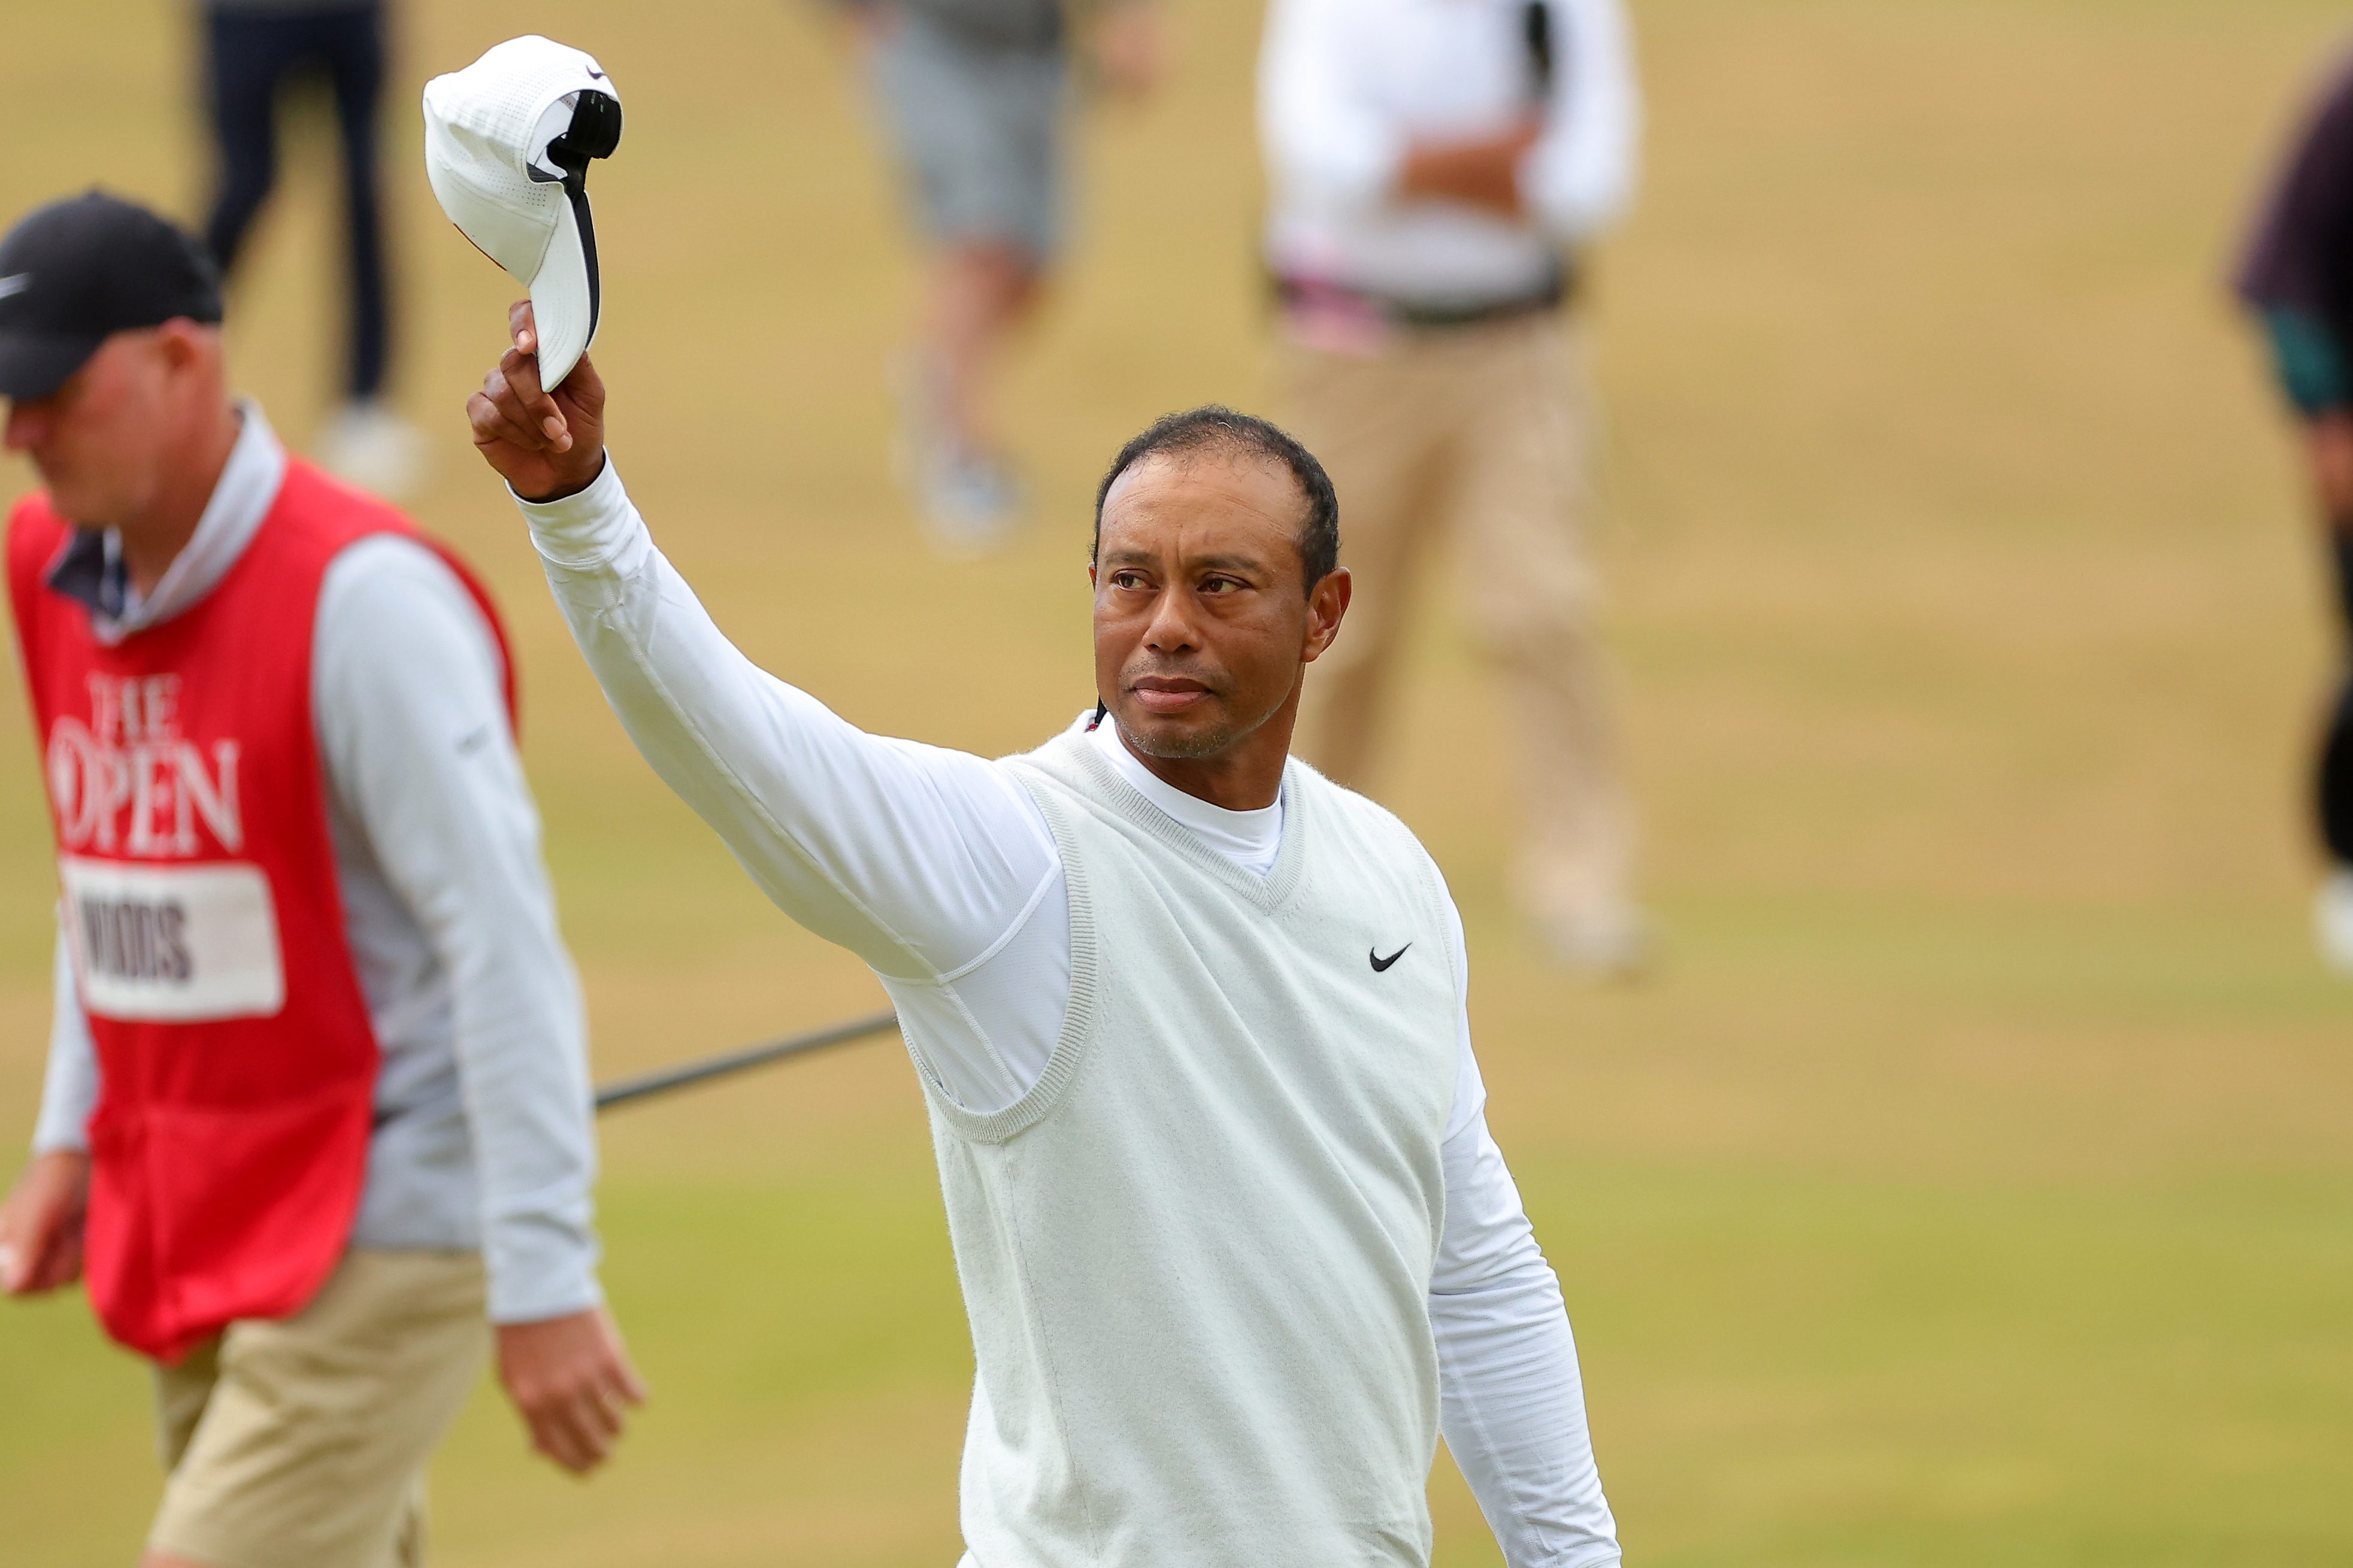 Tiger Woods waves to the crowd at the 150th Open at St Andrews.